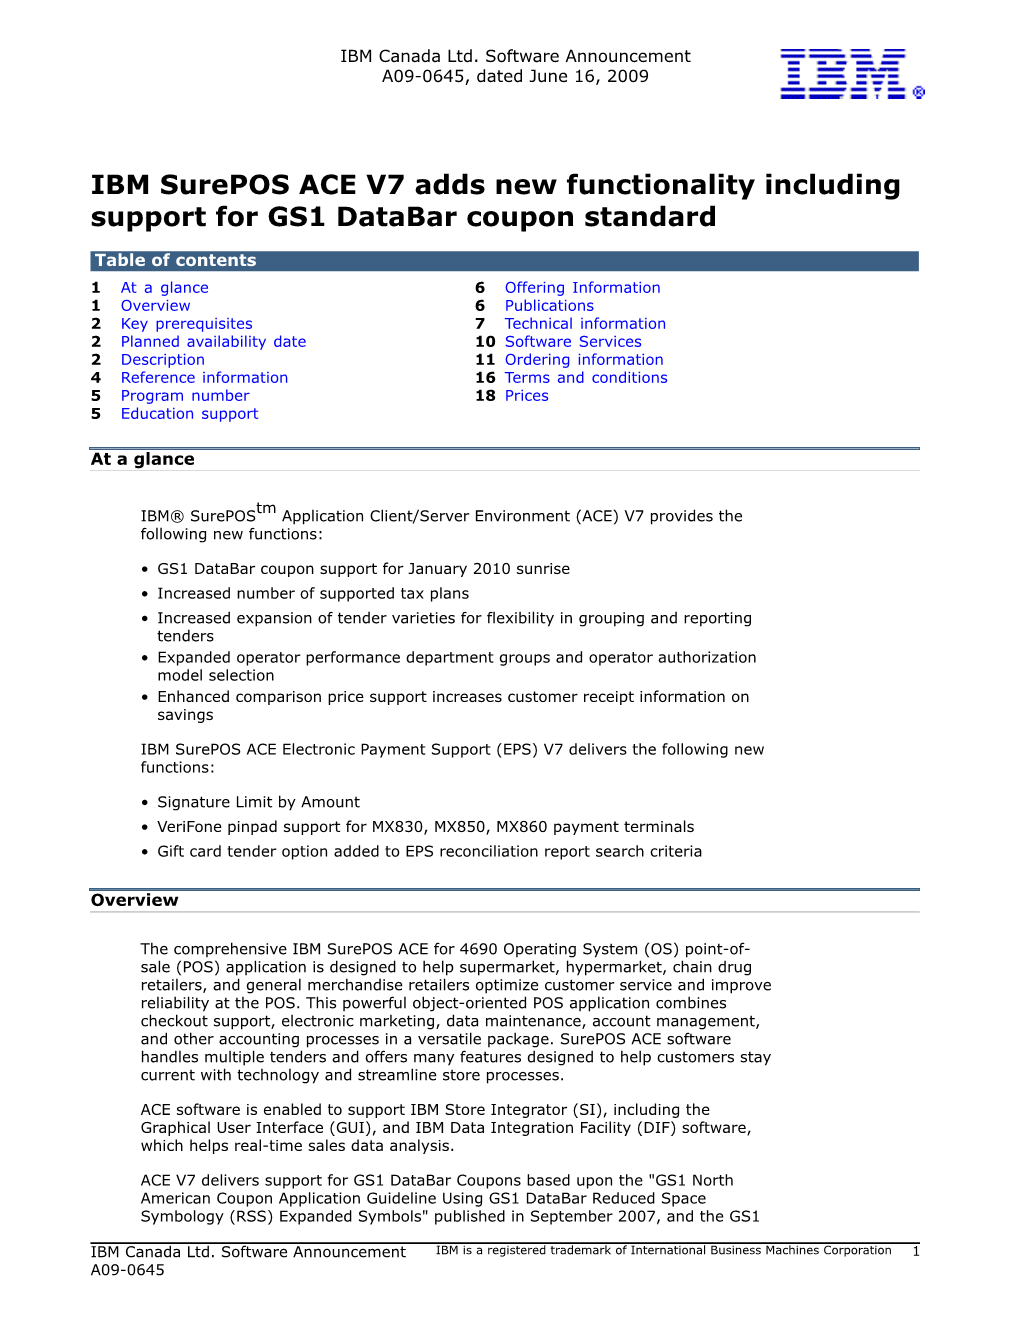 IBM Surepos ACE V7 Adds New Functionality Including Support for GS1 Databar Coupon Standard